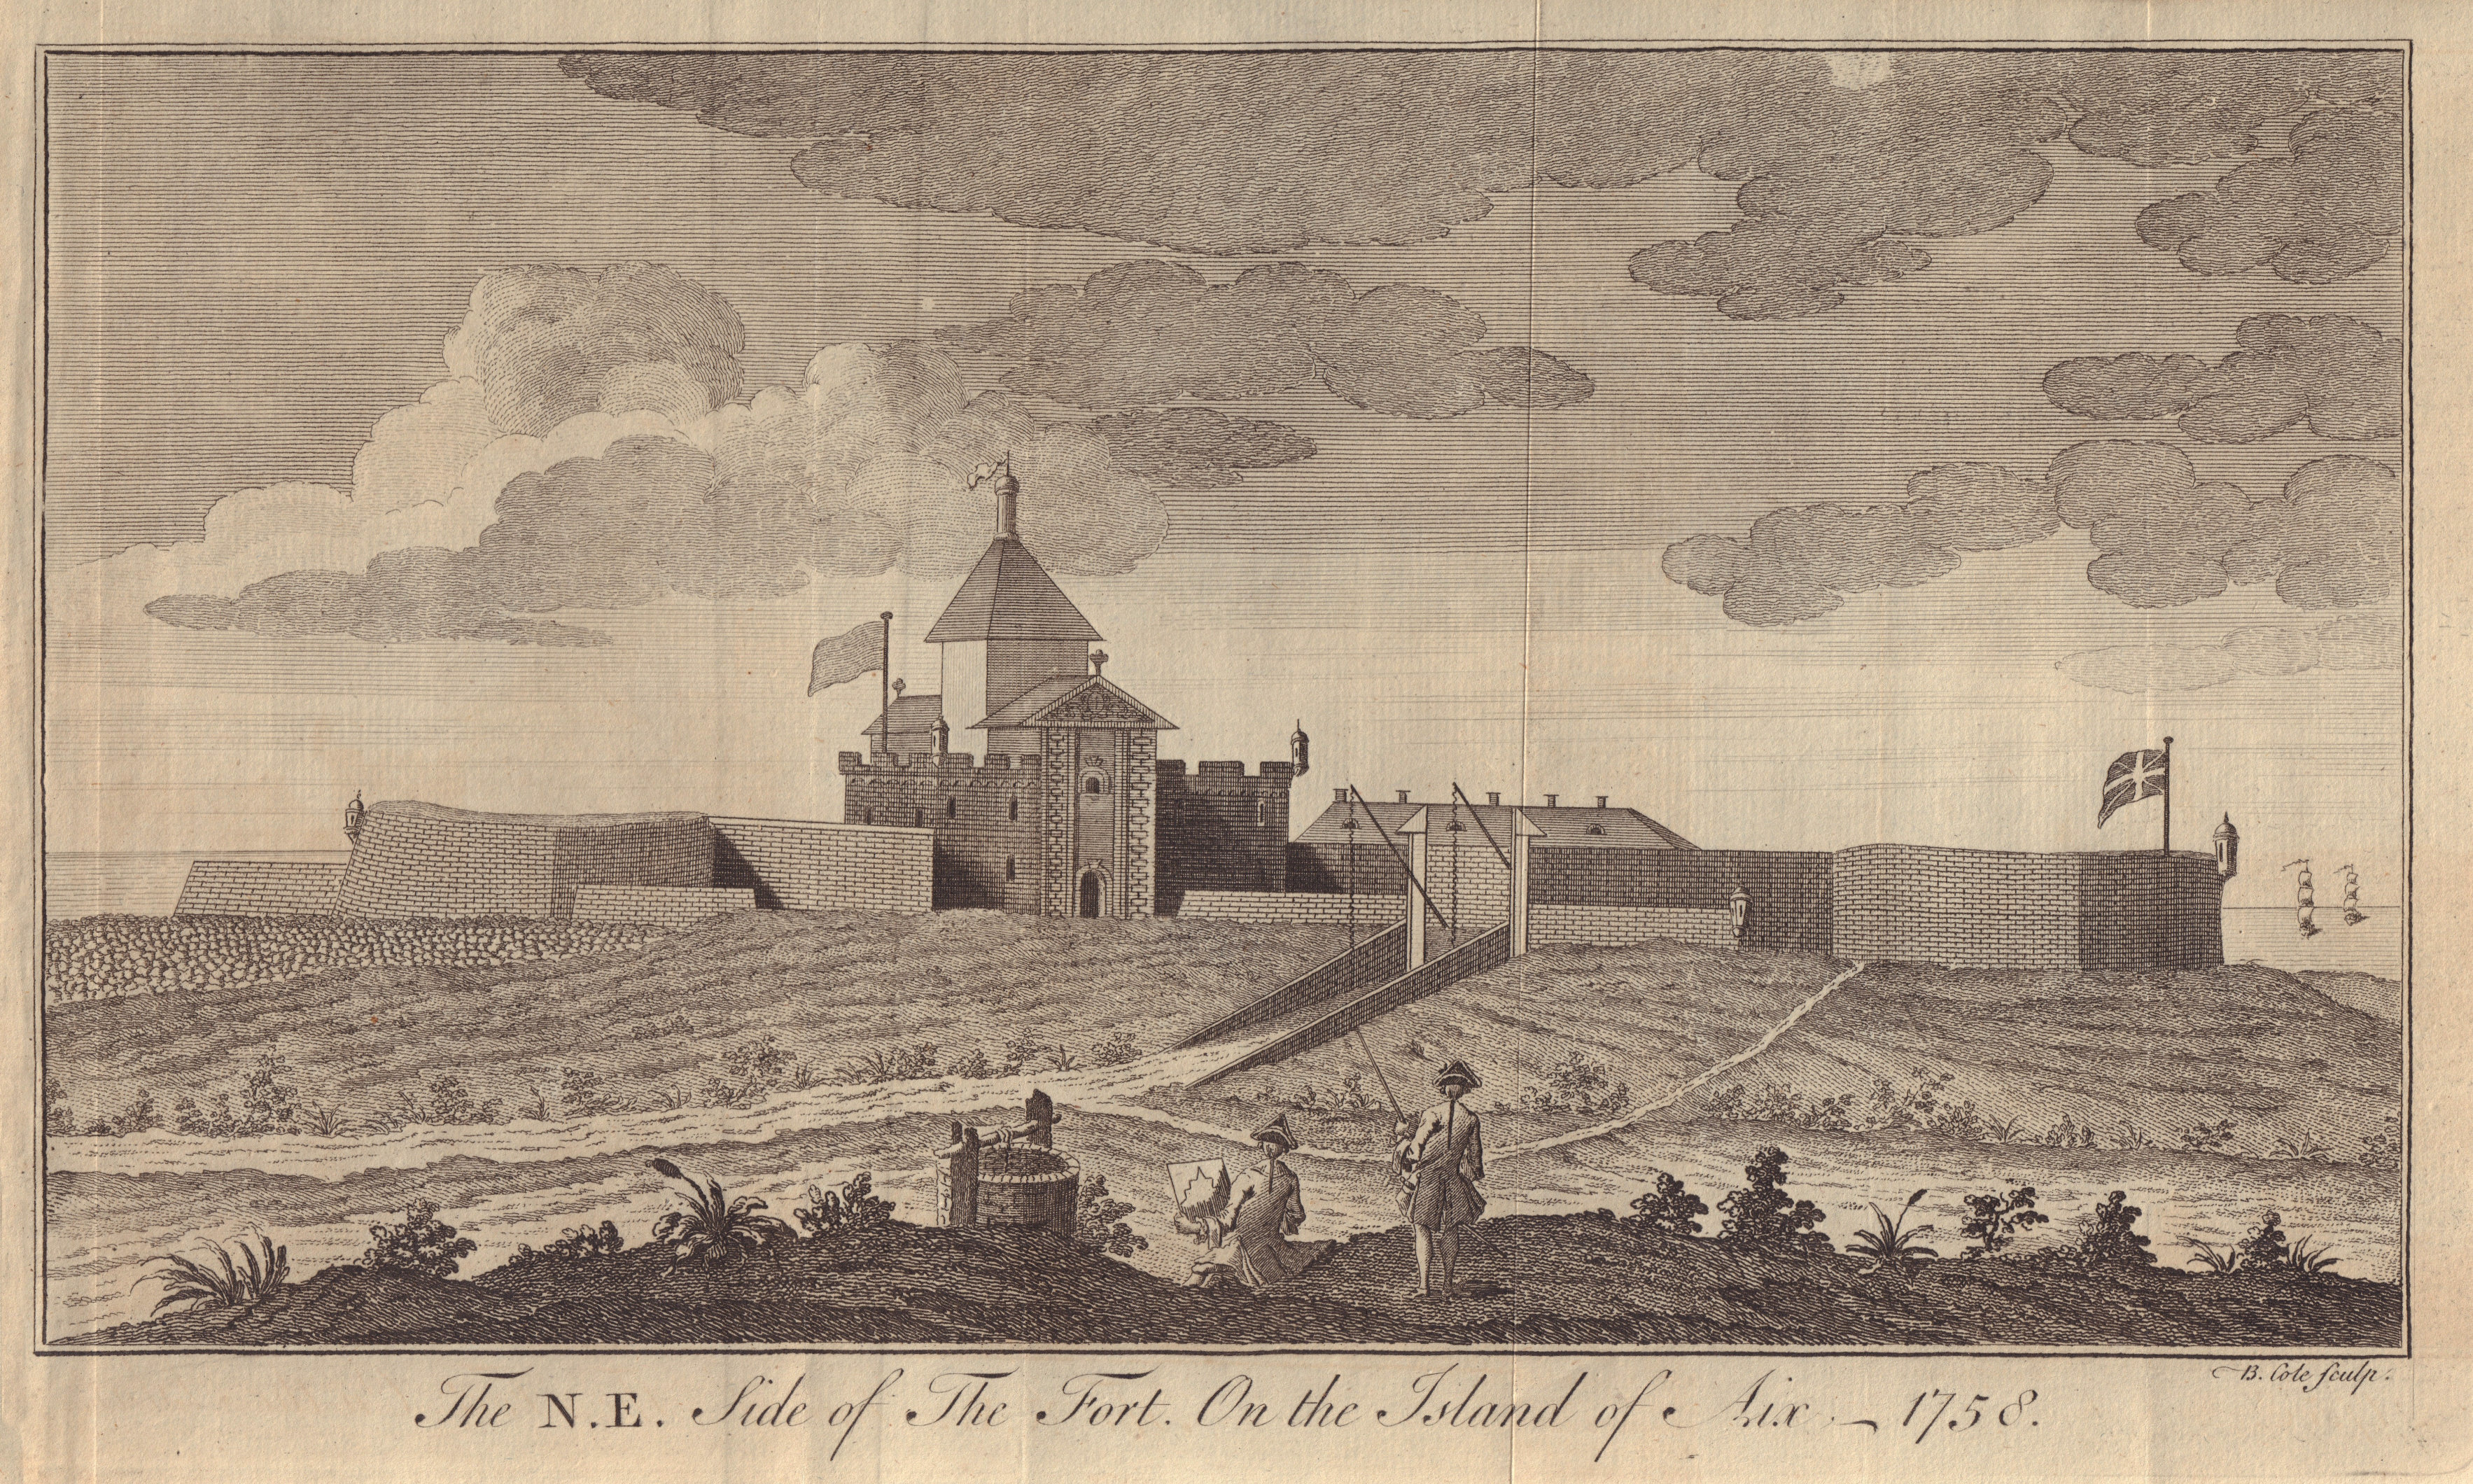 The N.E. side of the Fort on the Island of Aix. Île-d'Aix Charente-Maritime 1758